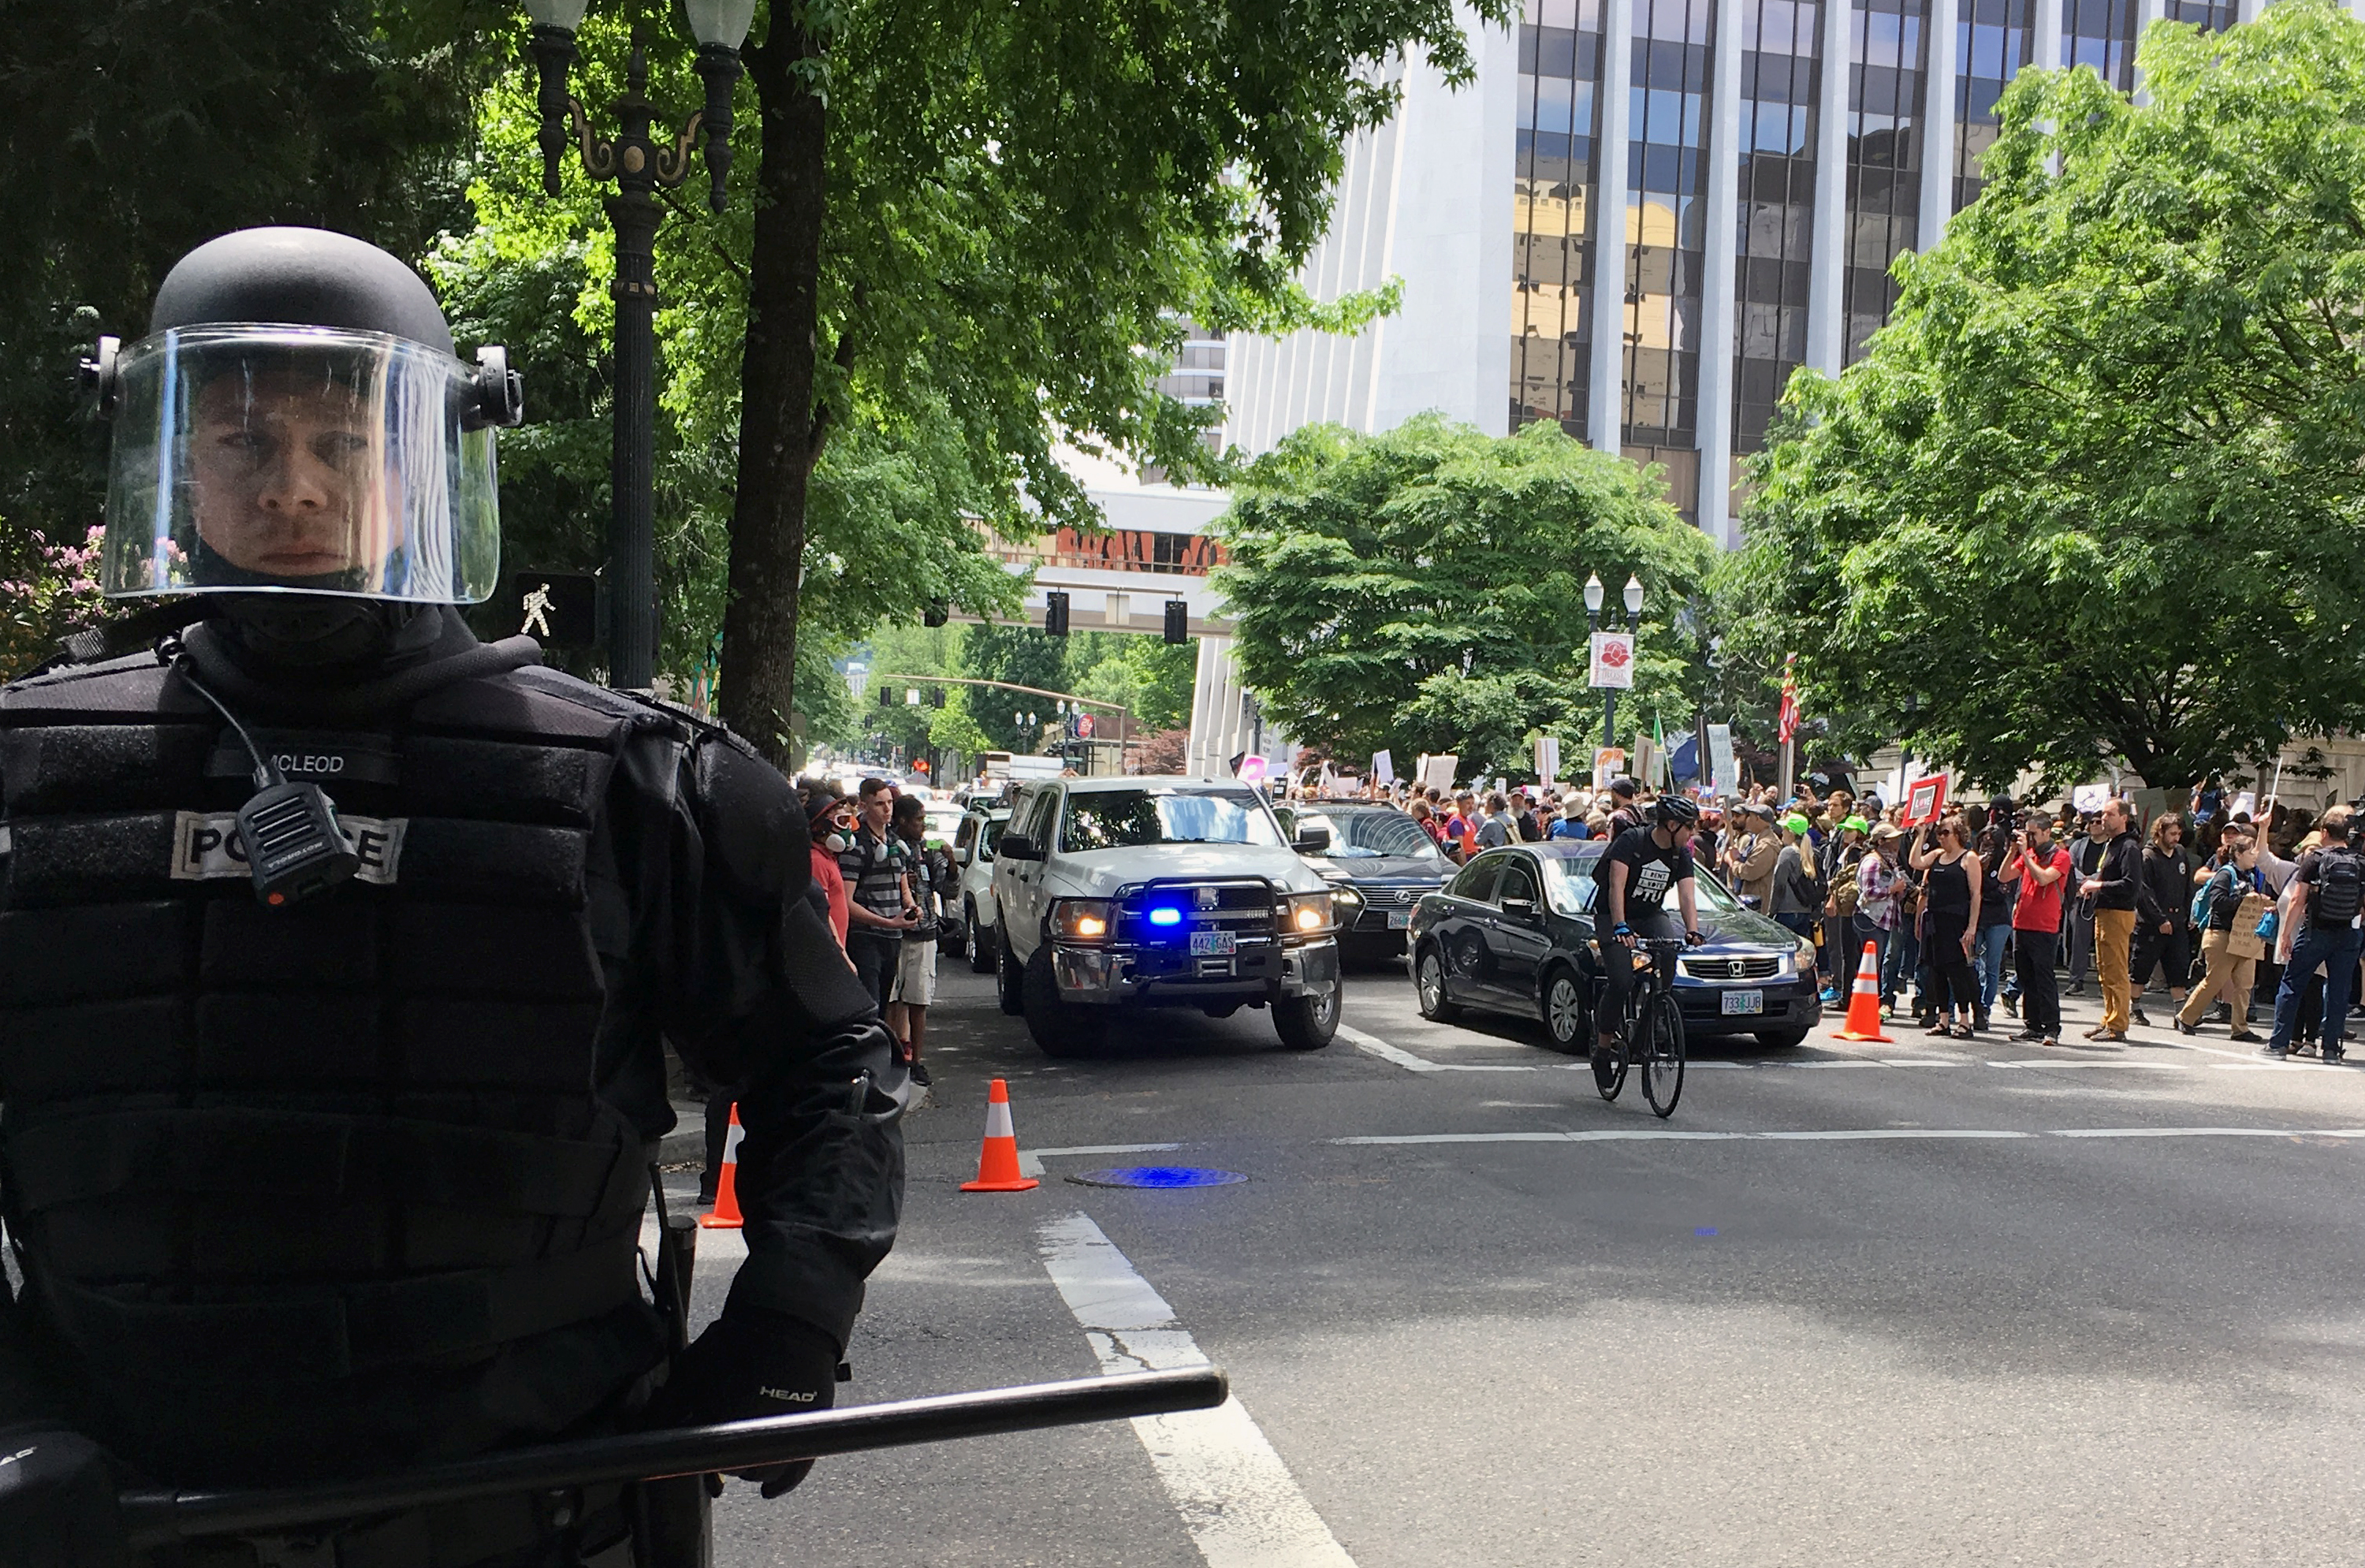 Day of Portland demonstrations marked by arrests, clashes - The Blade